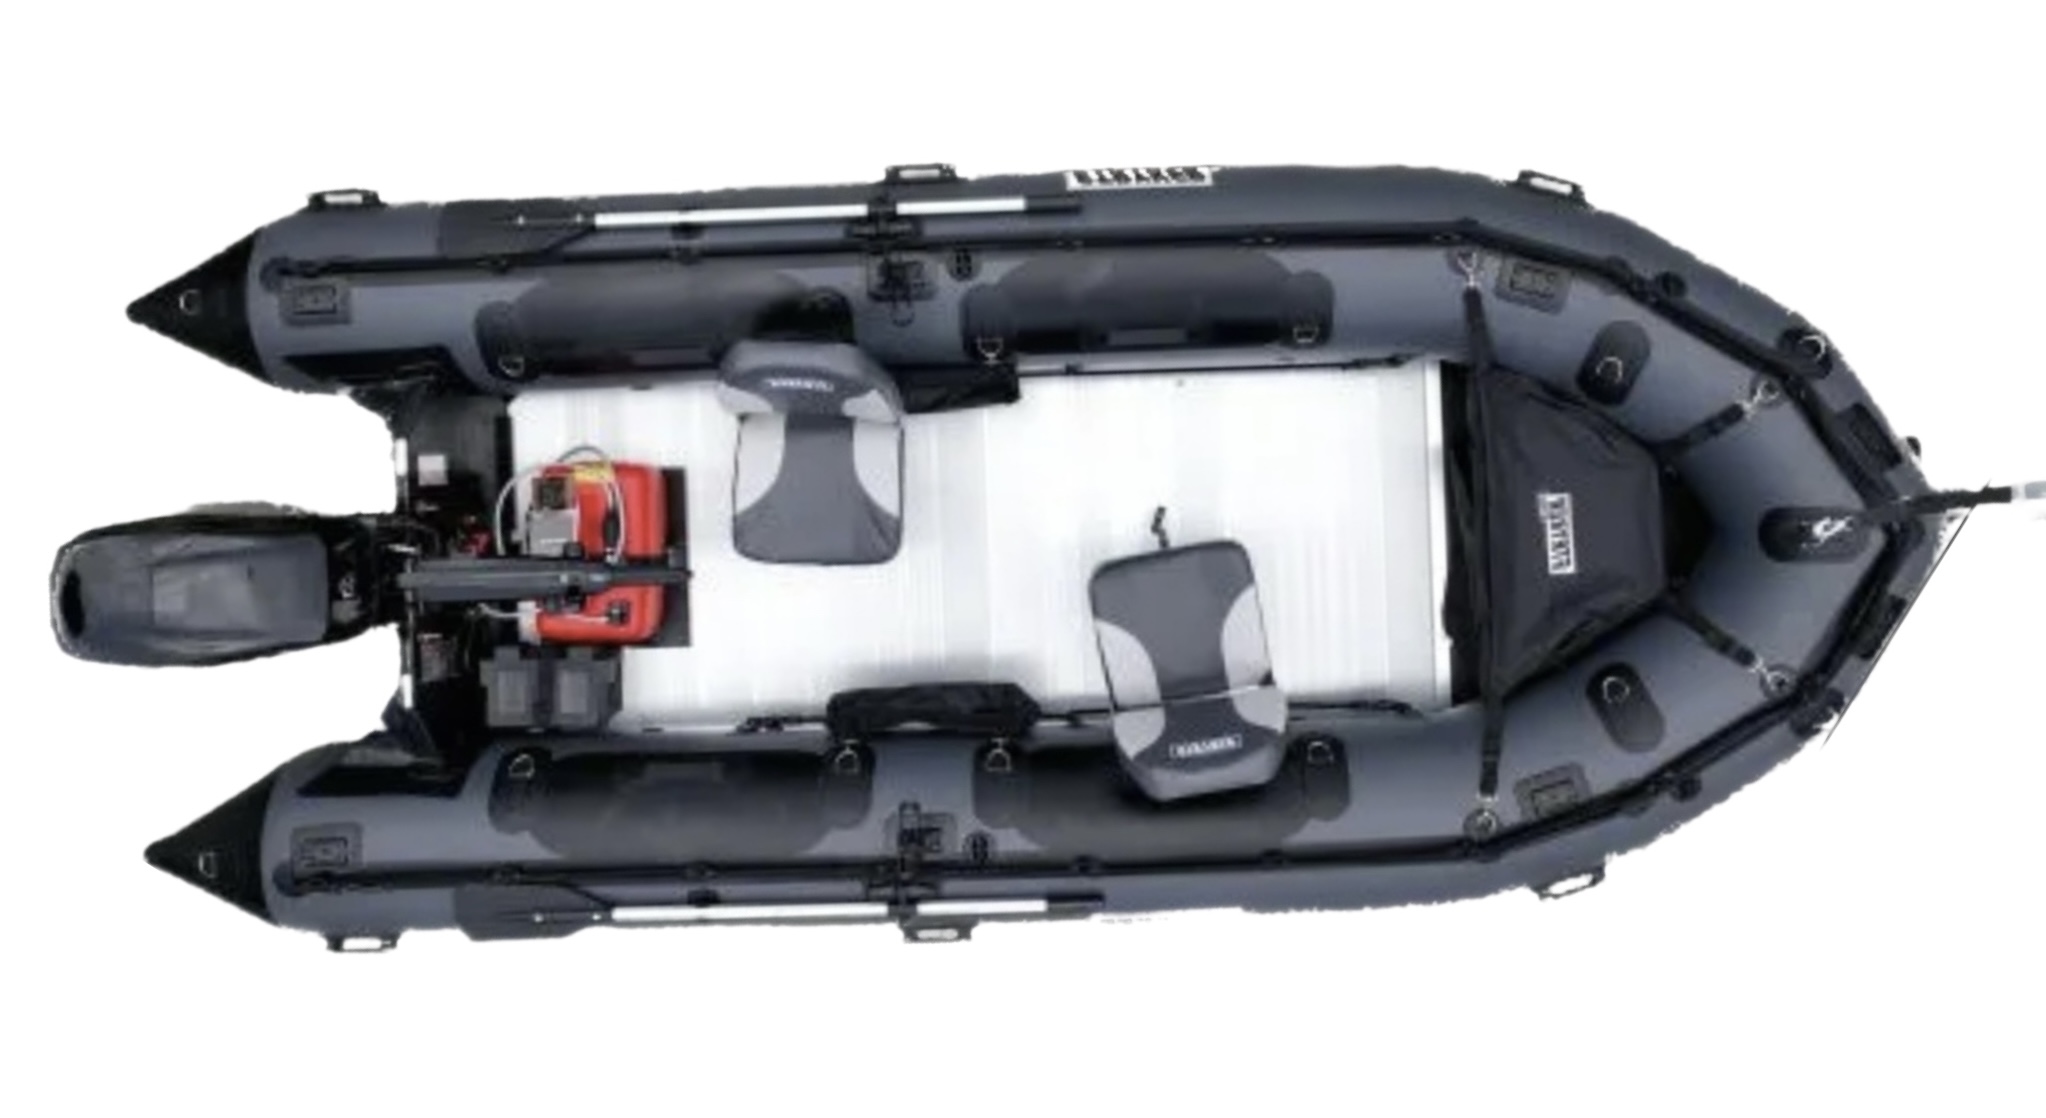 Stryker PRO 470 (15’ 4”) Inflatable Boat